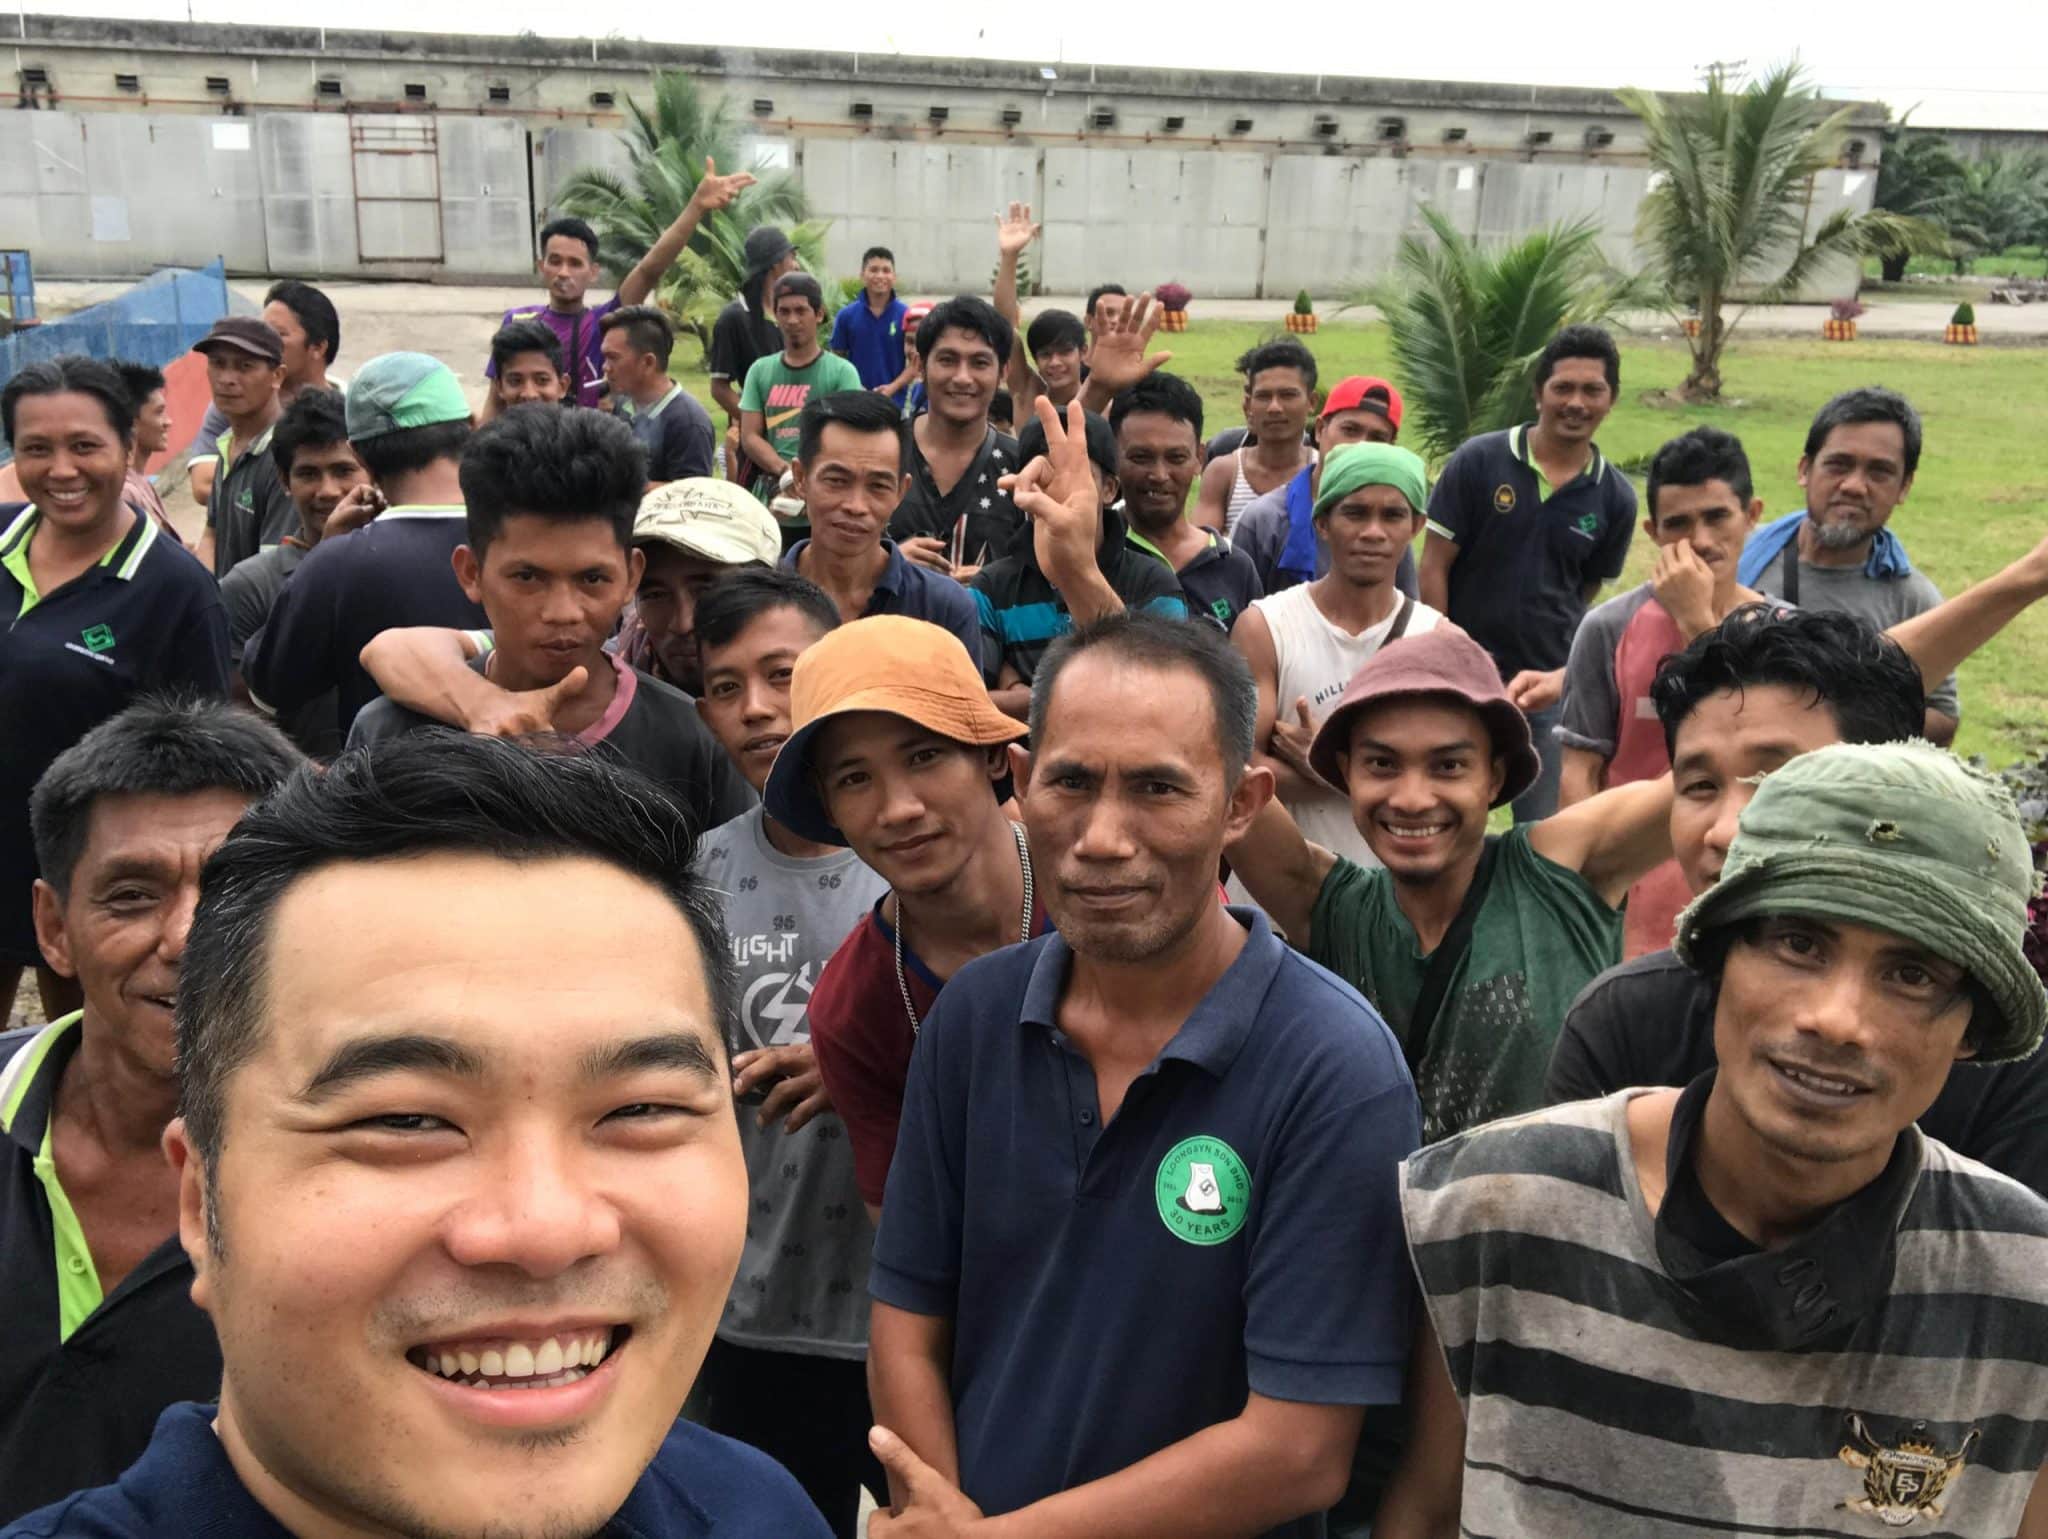 Being salt of the earth means being an agent of transformation wherever you go, says Abel, pictured here with some of his factory staff.